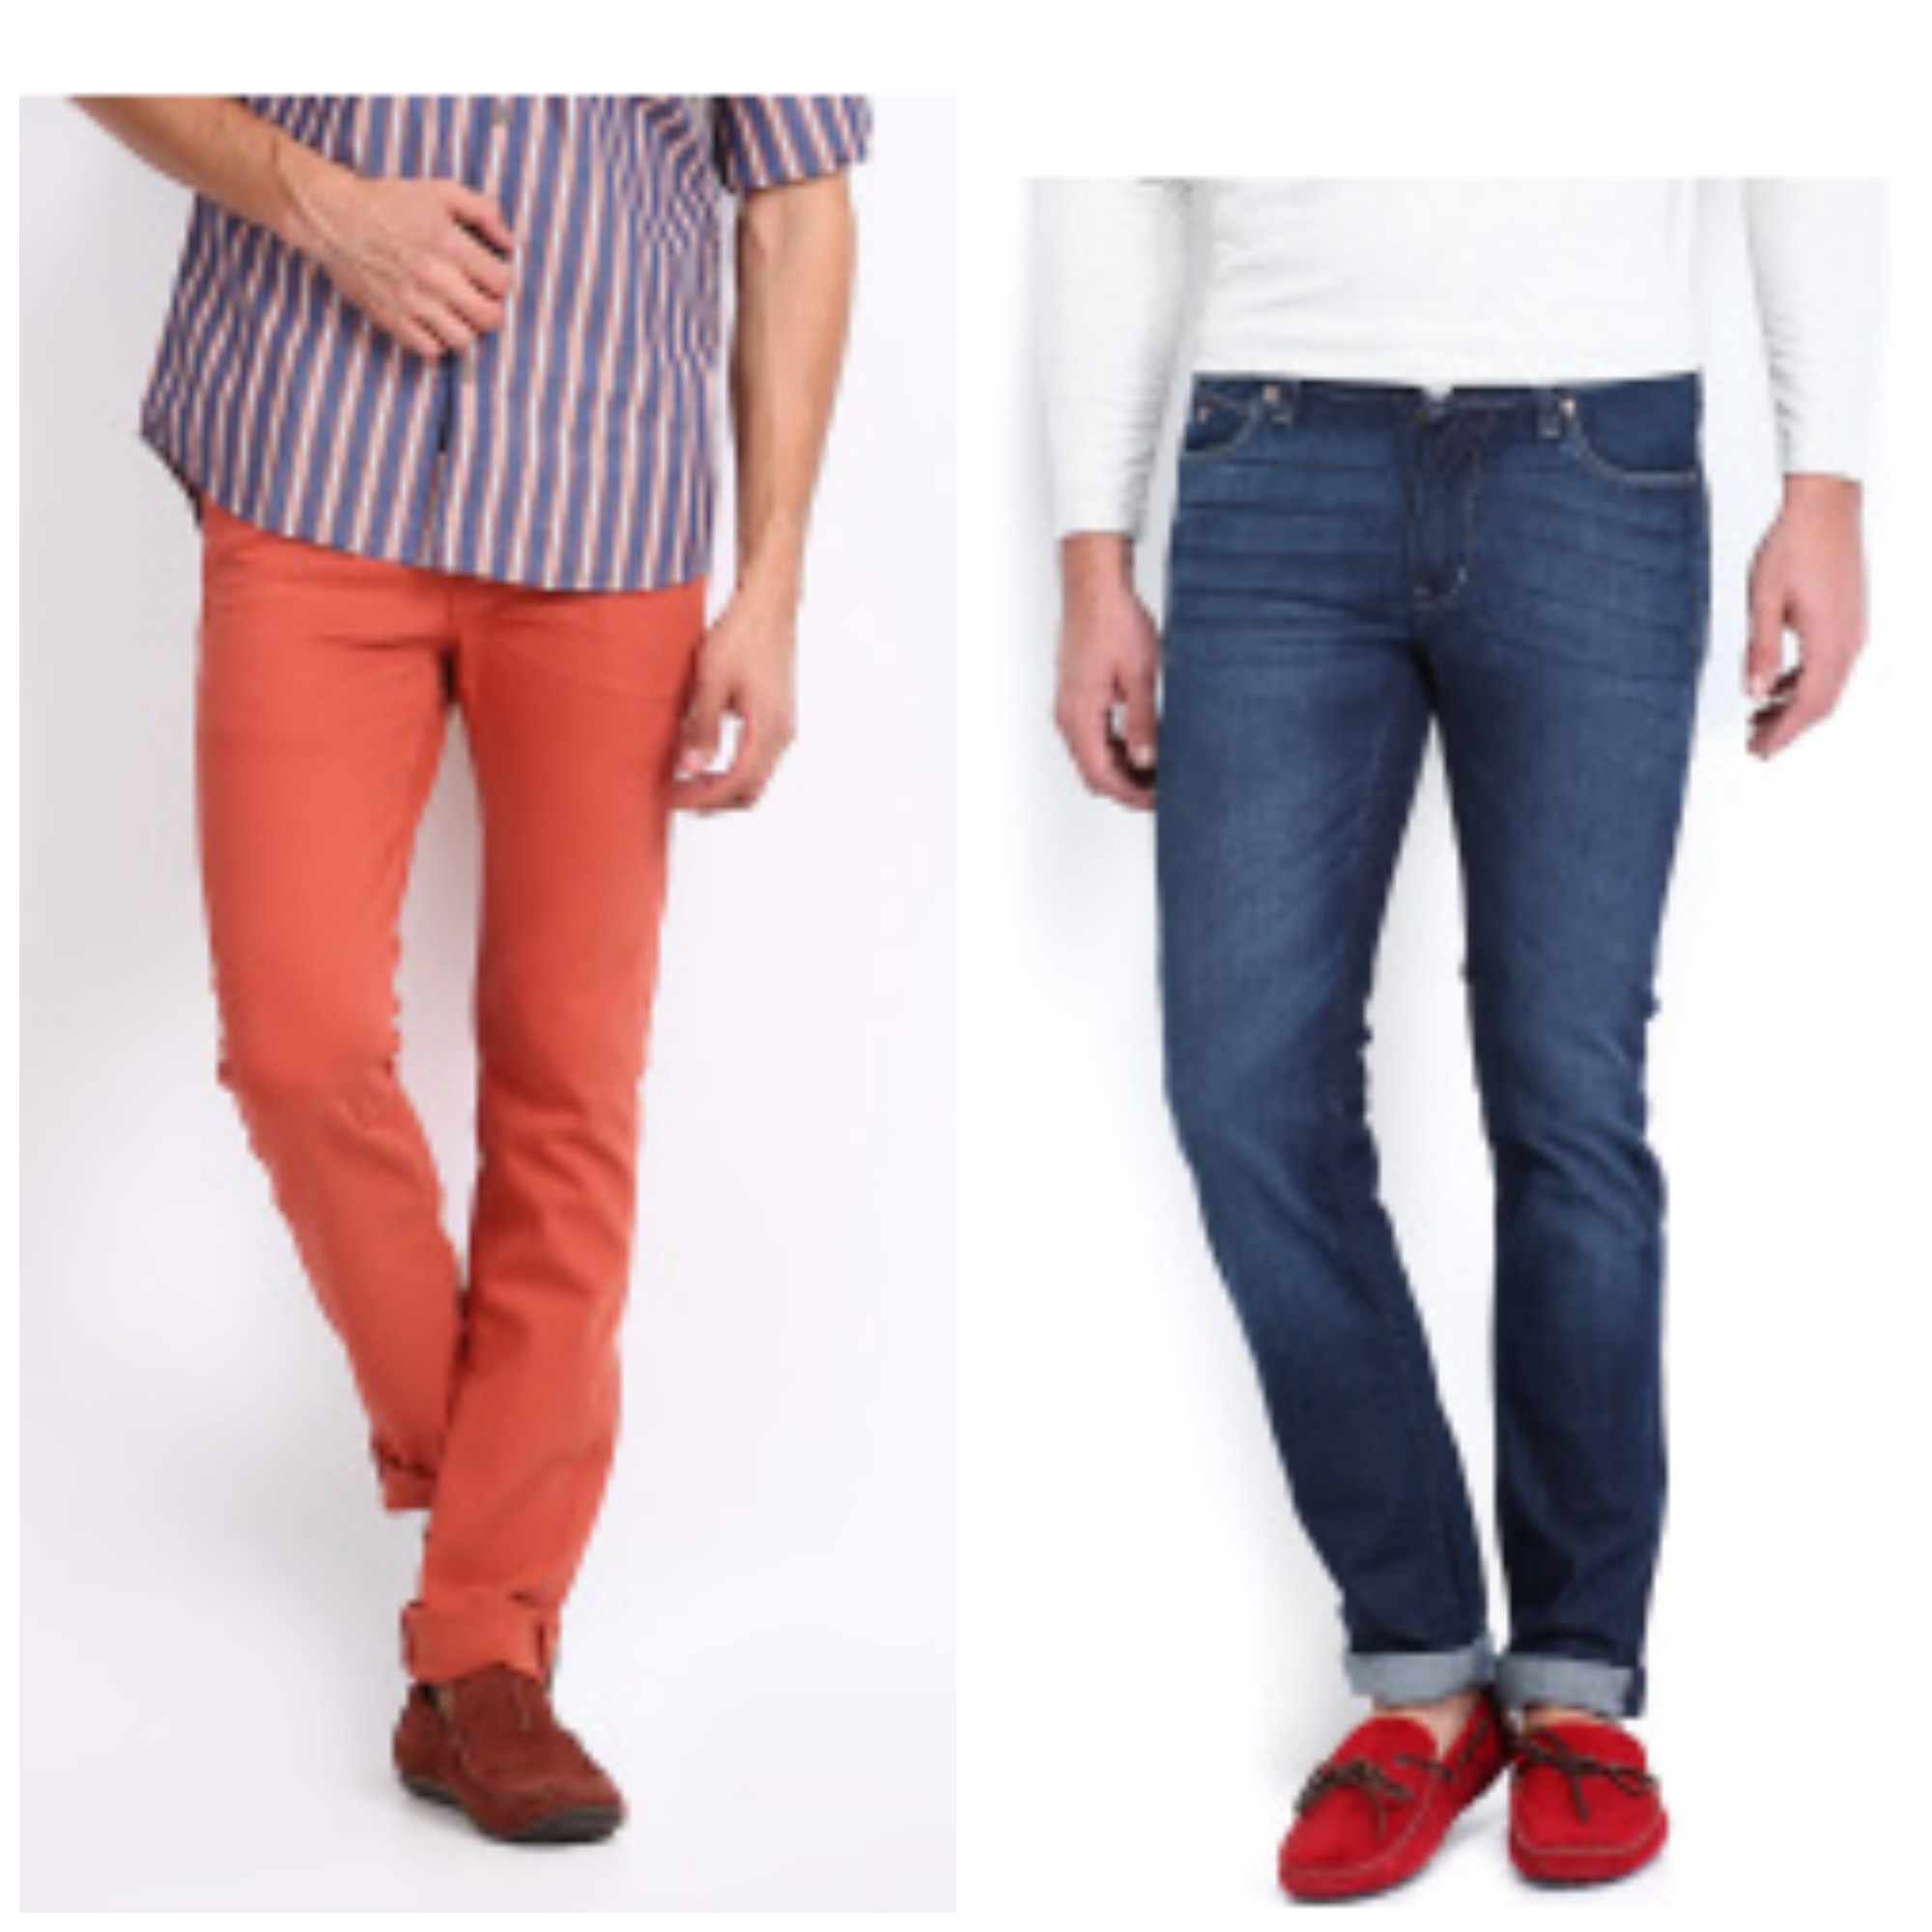 U.S. POLO ASSN Jeans at Flat 50% off